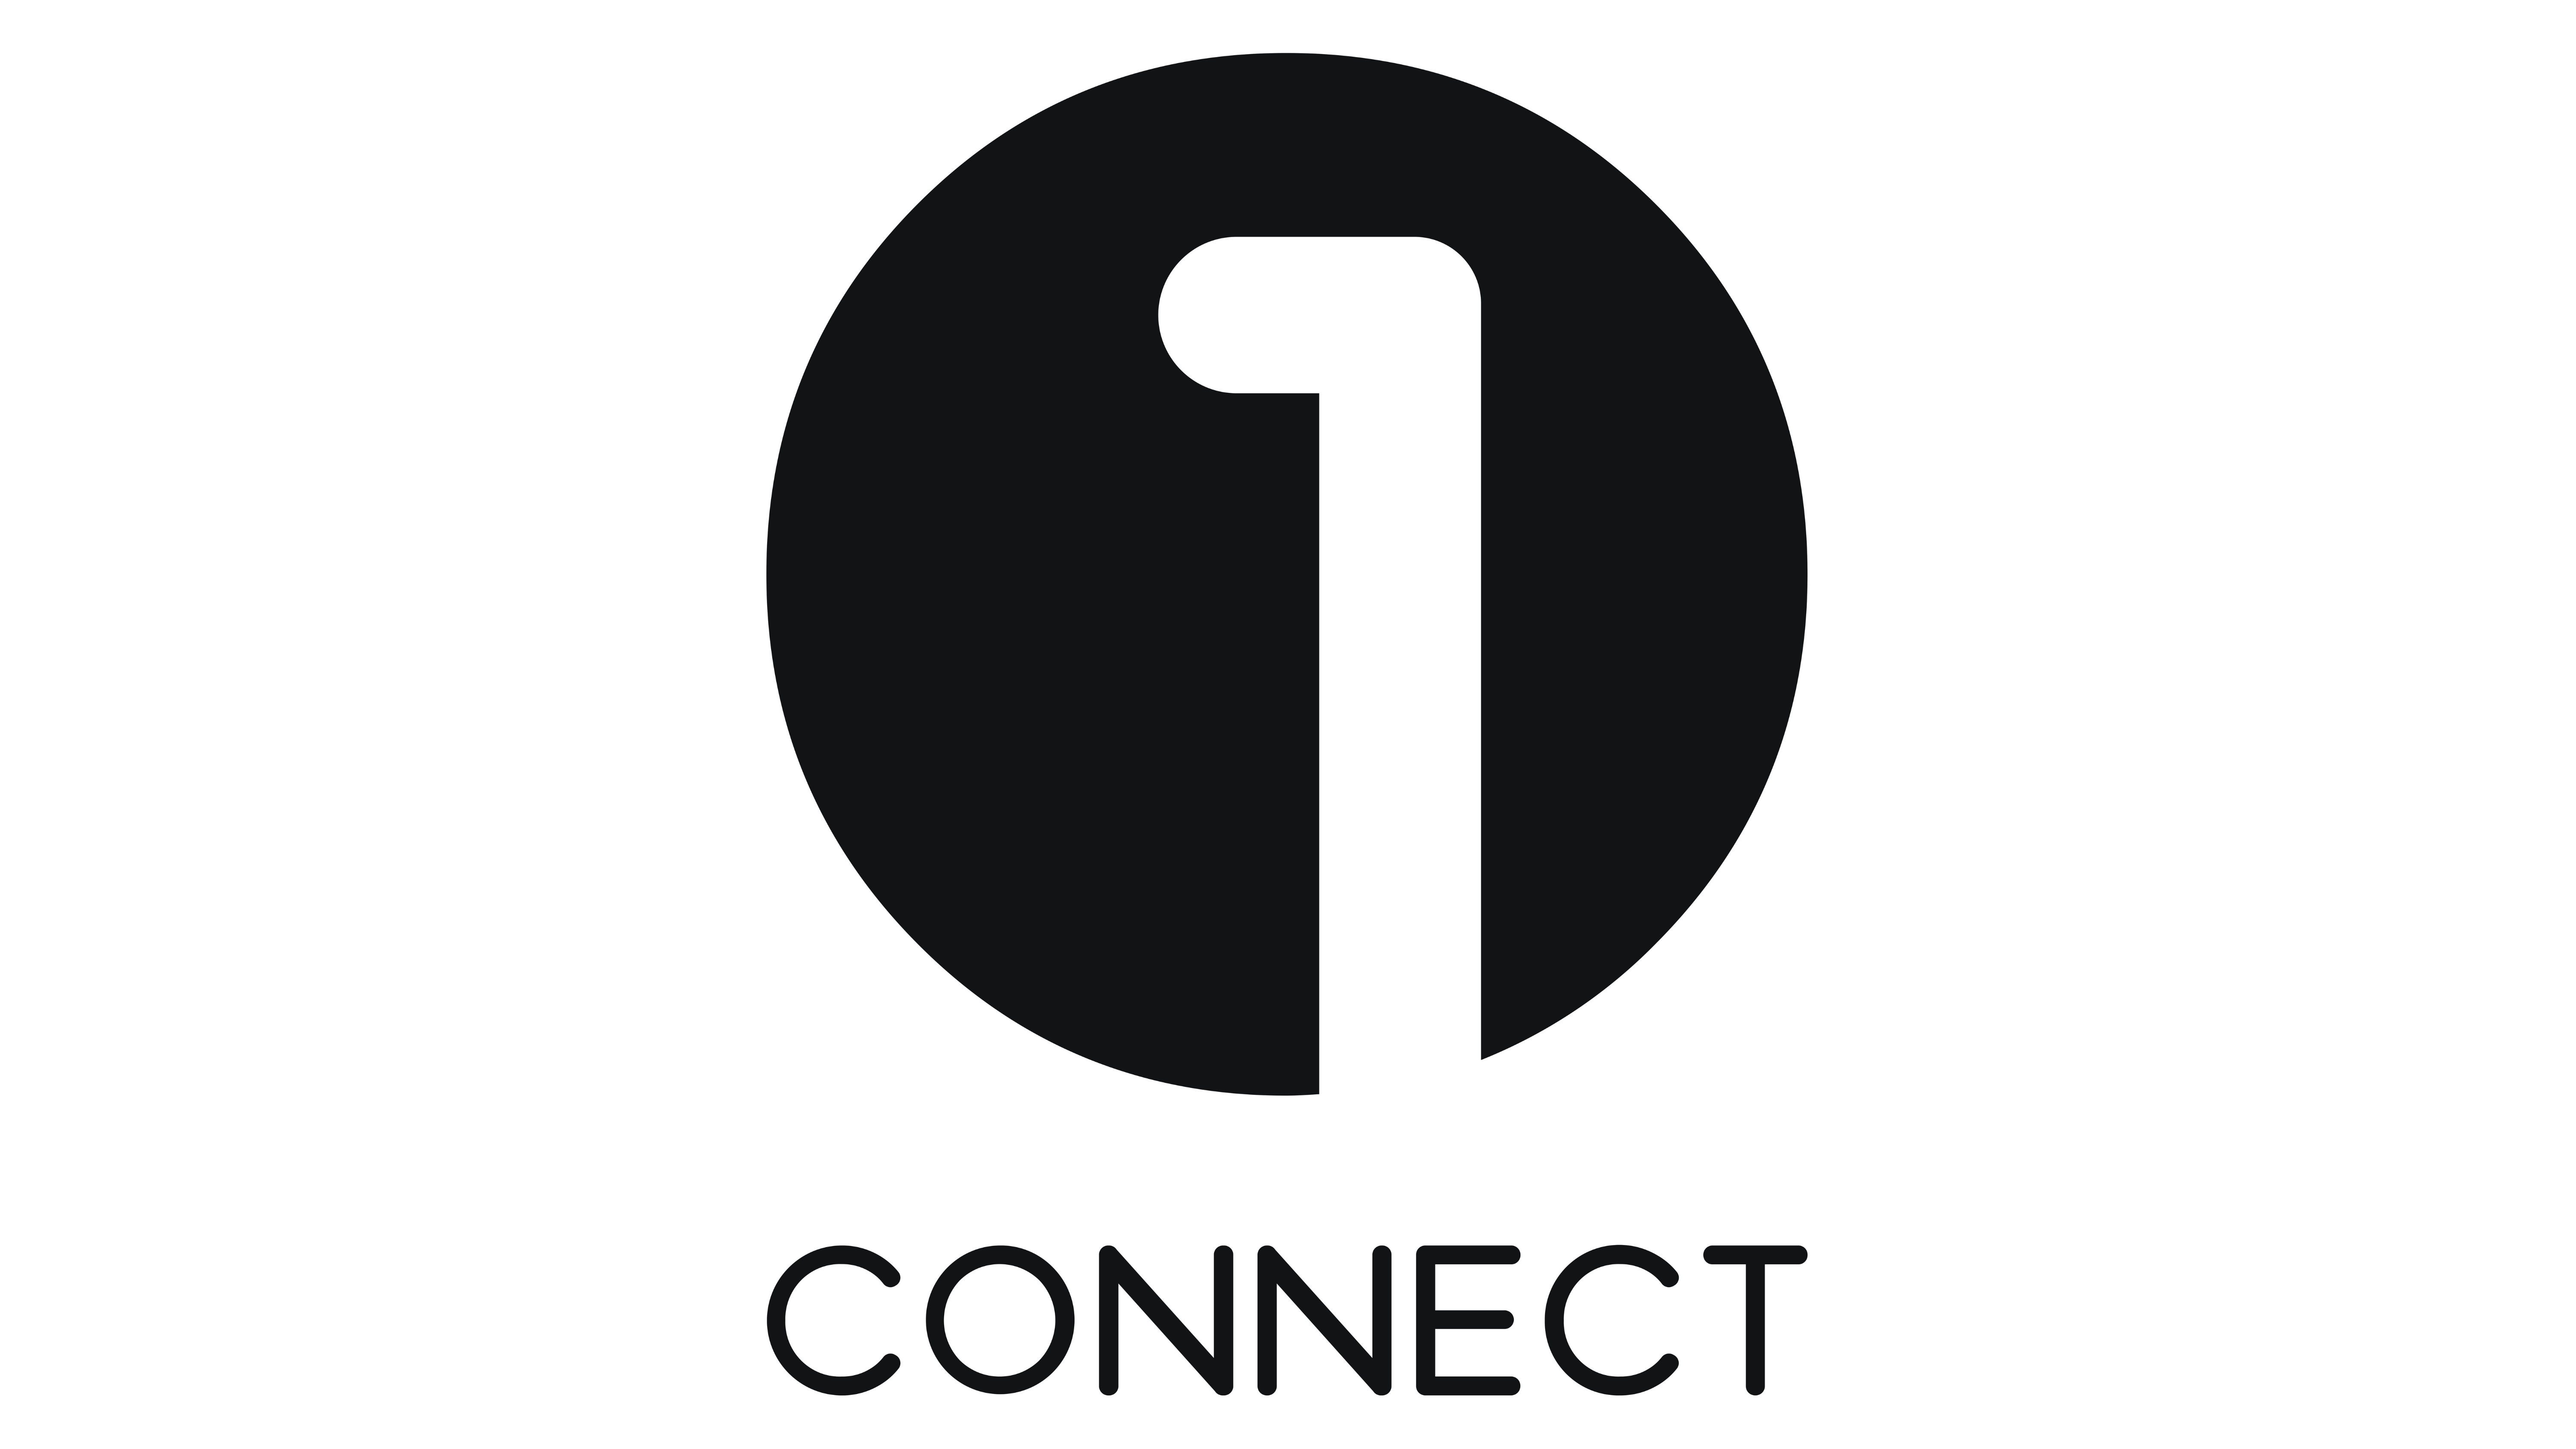 1Connect